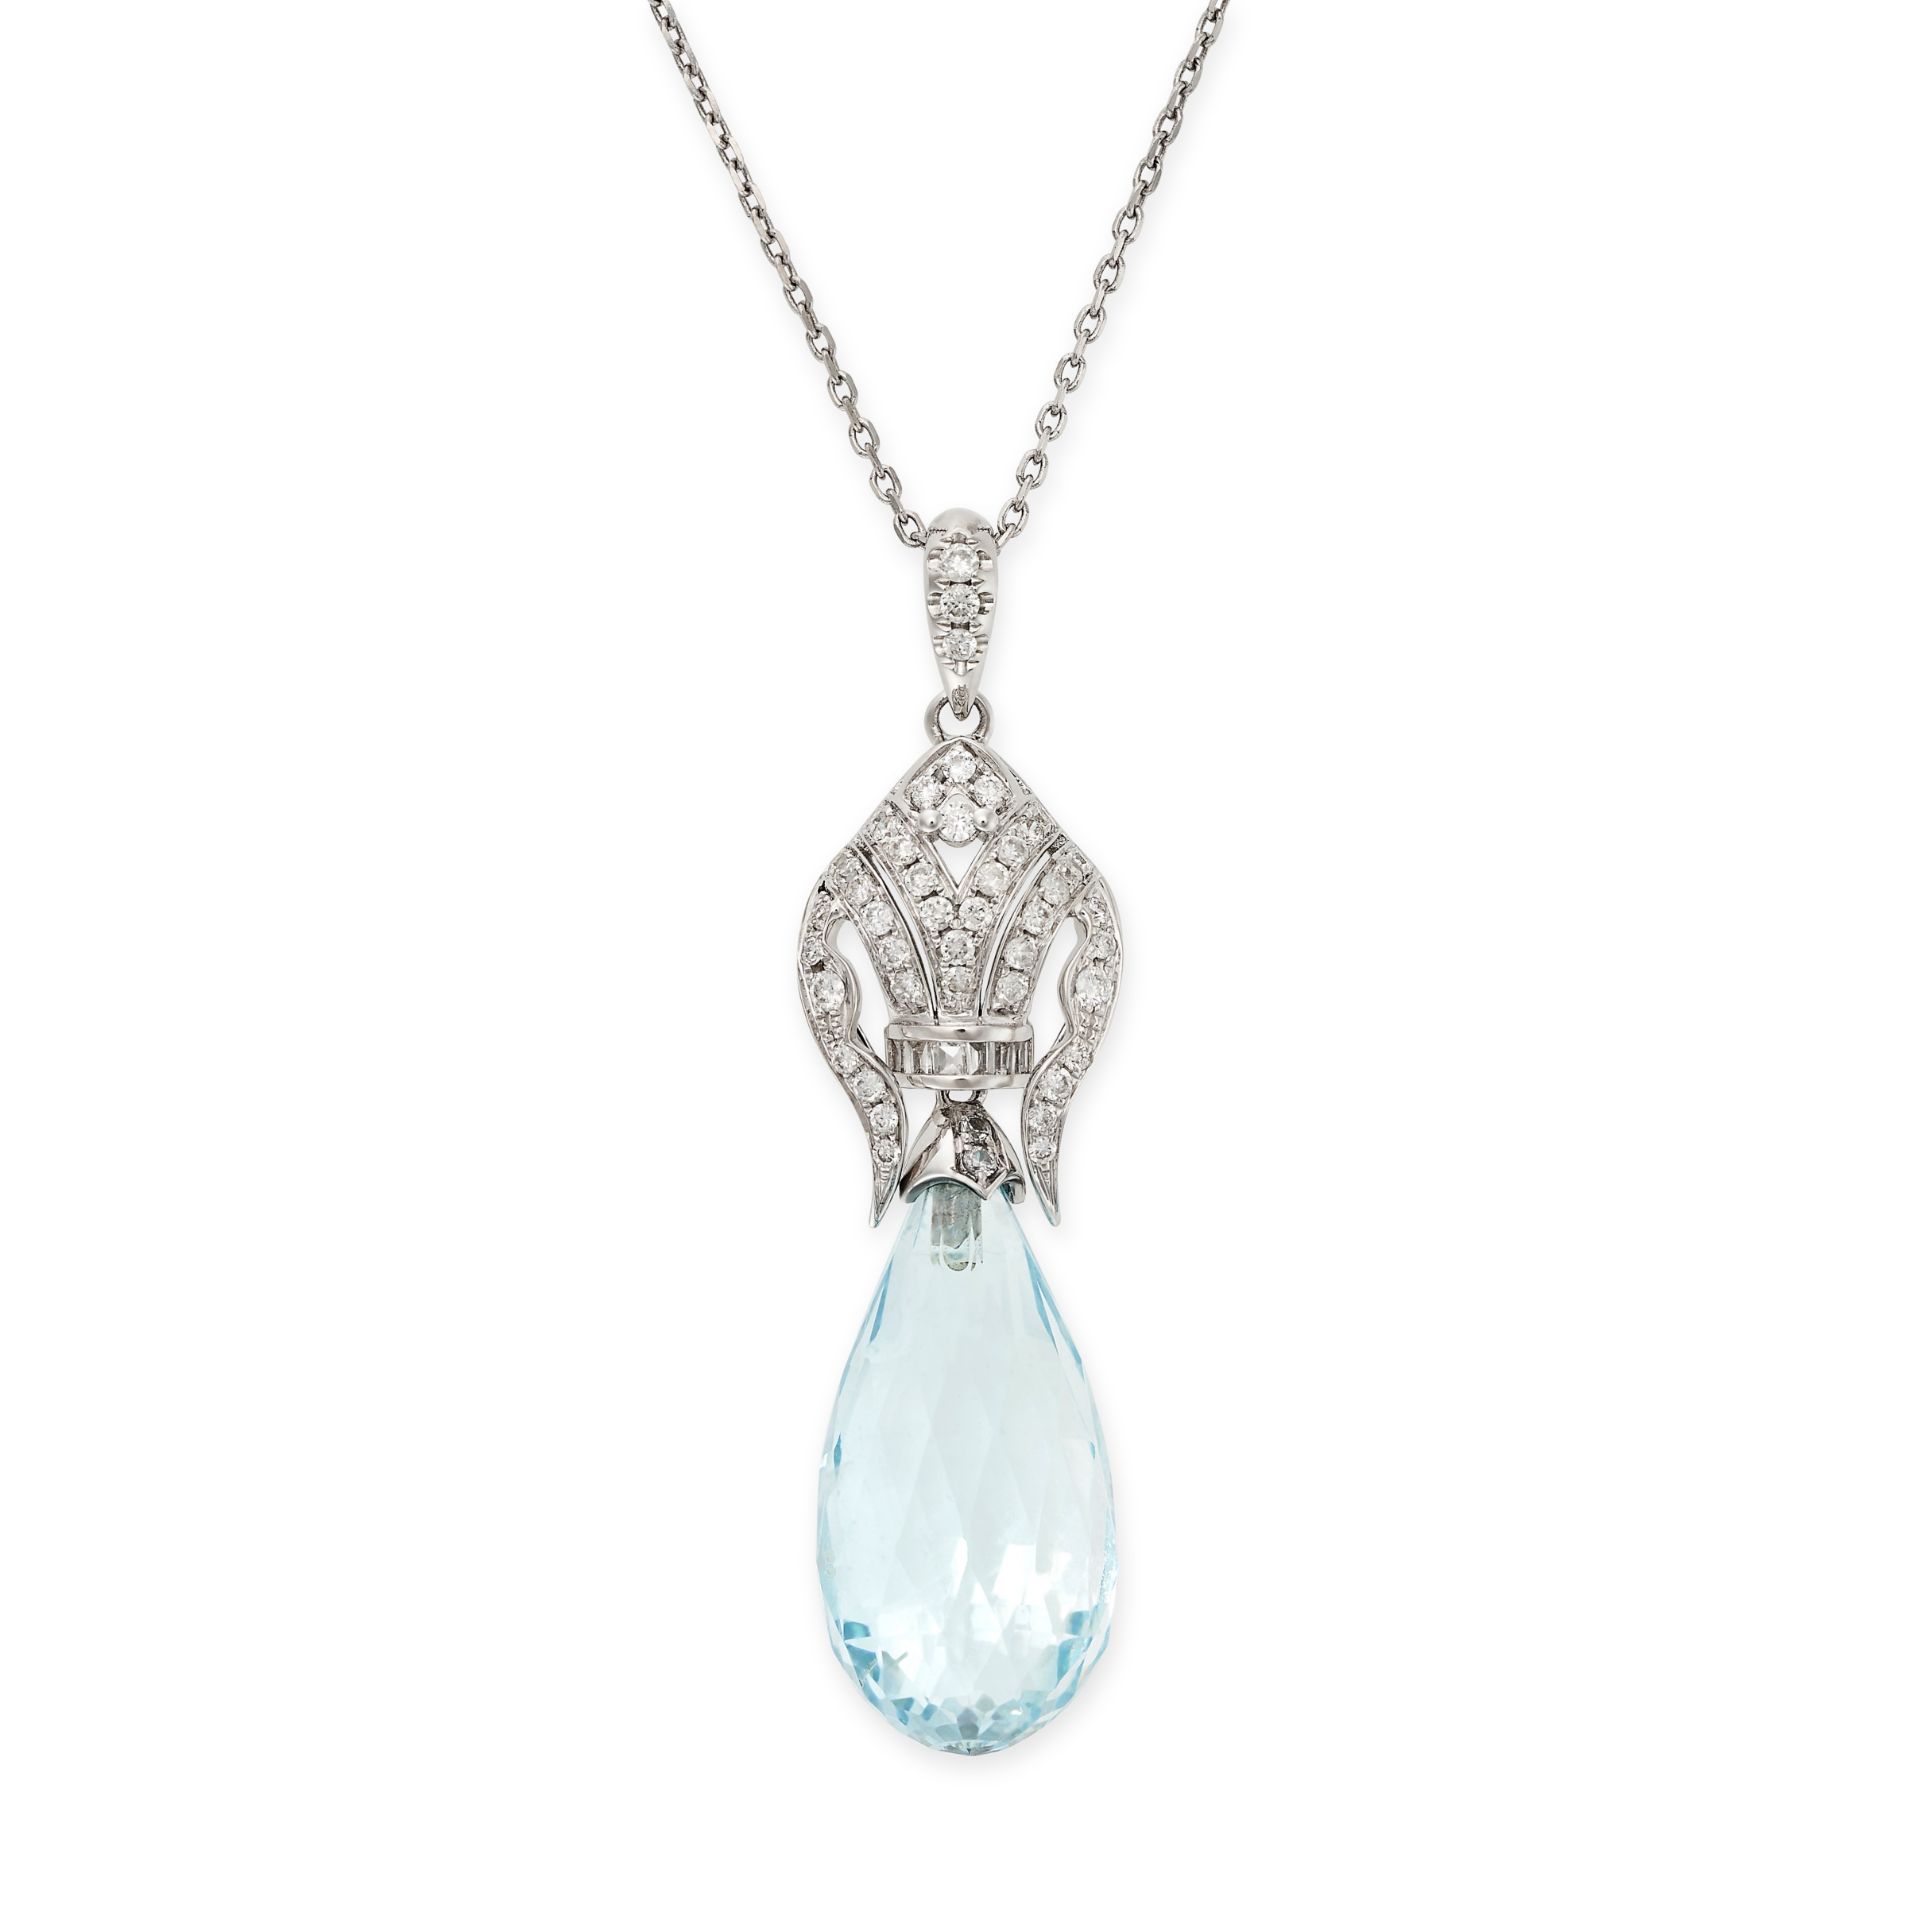 AN AQUAMARINE AND DIAMOND PENDANT NECKLACE in 18ct white gold, comprising an aquamarine briolette of